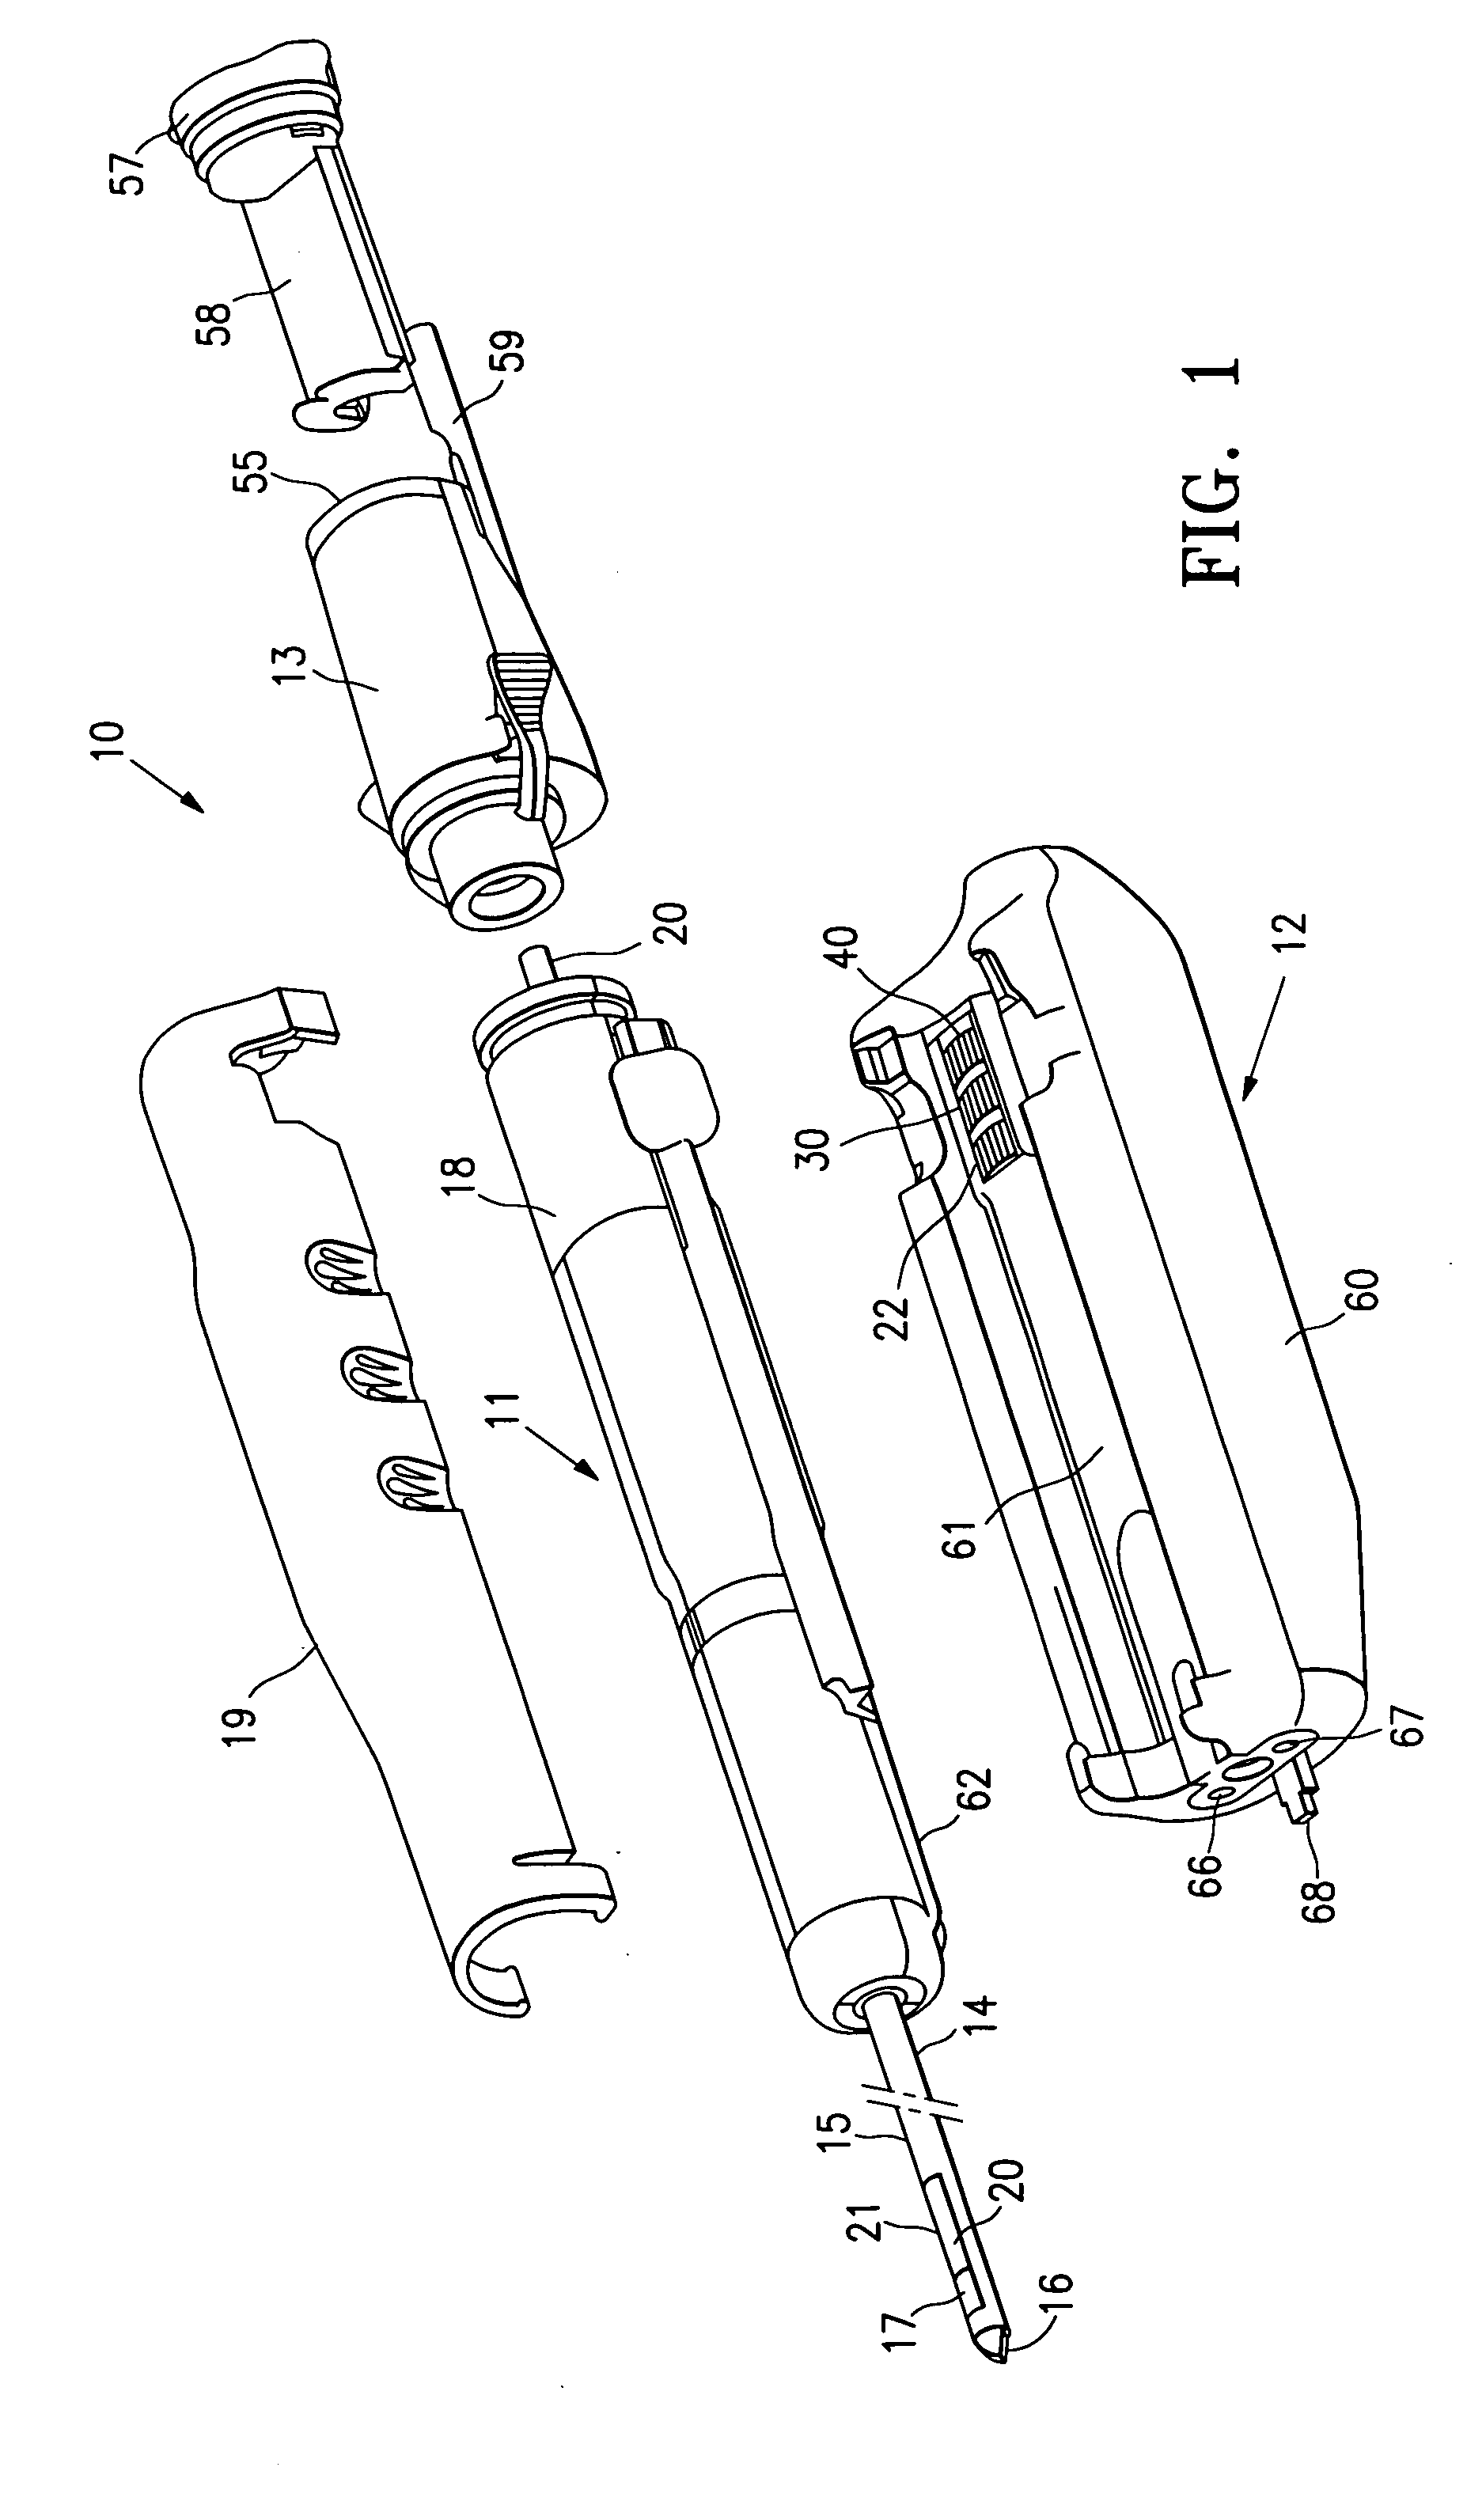 Biopsy device with aperture orientation and improved tip